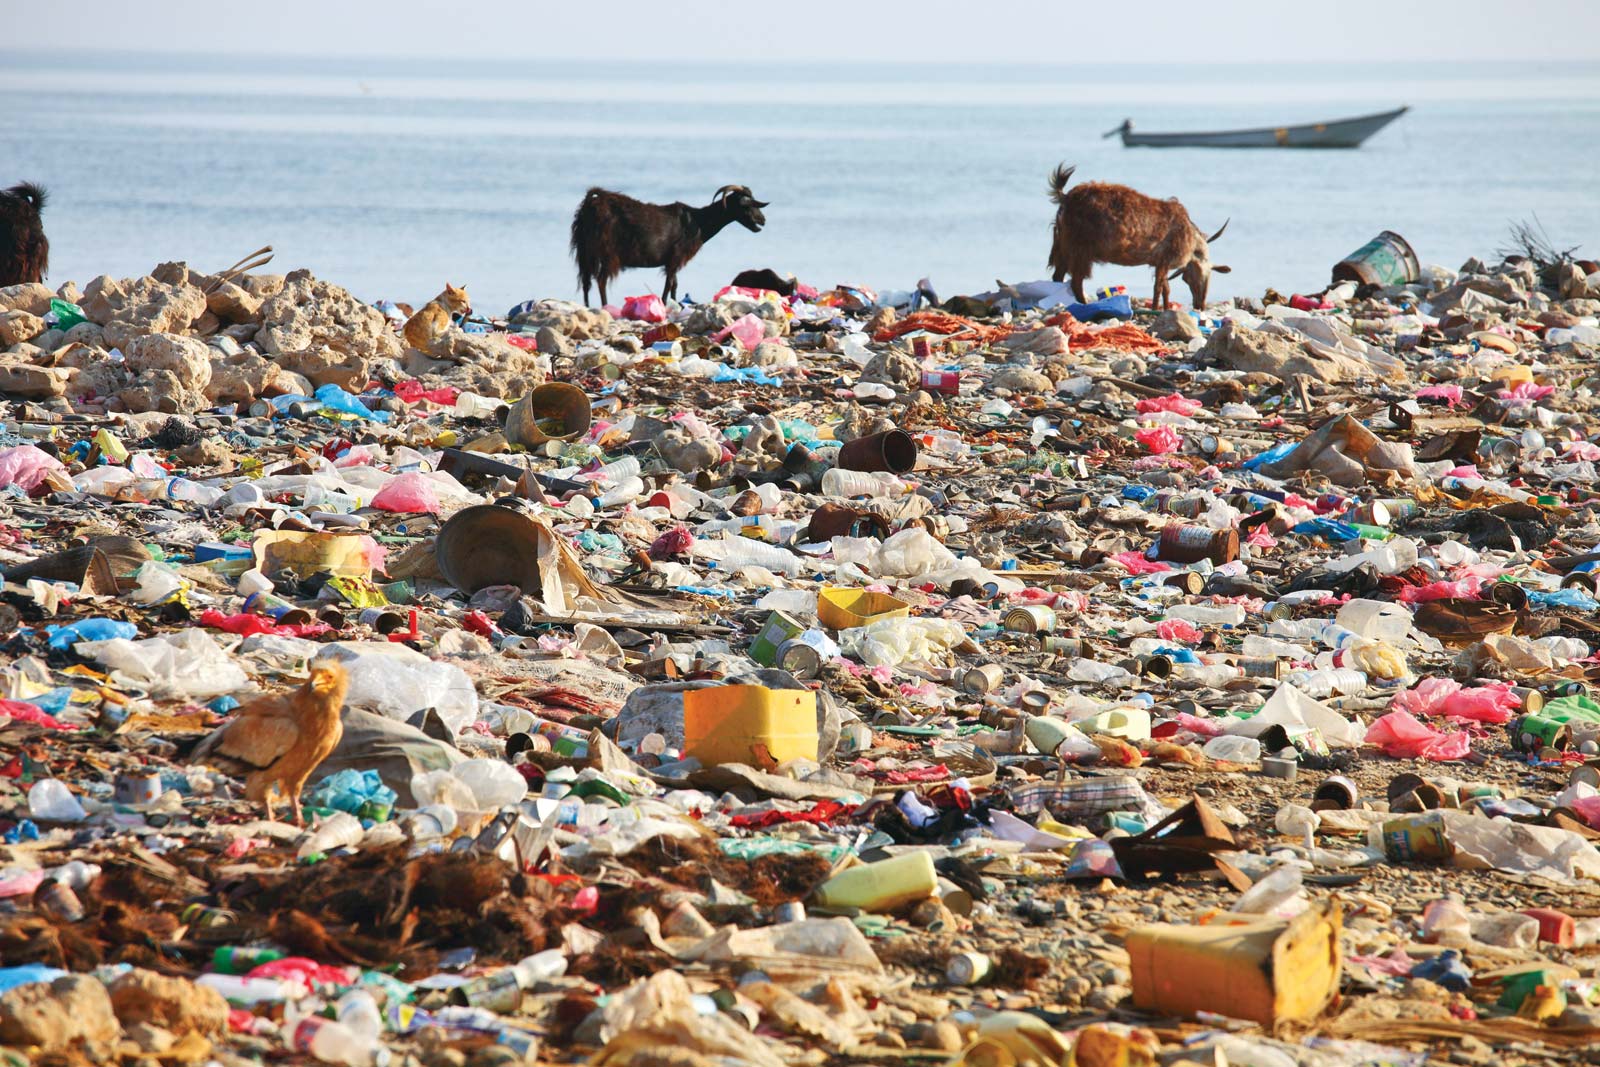 Waste and Plastic pollution with animals scavenging